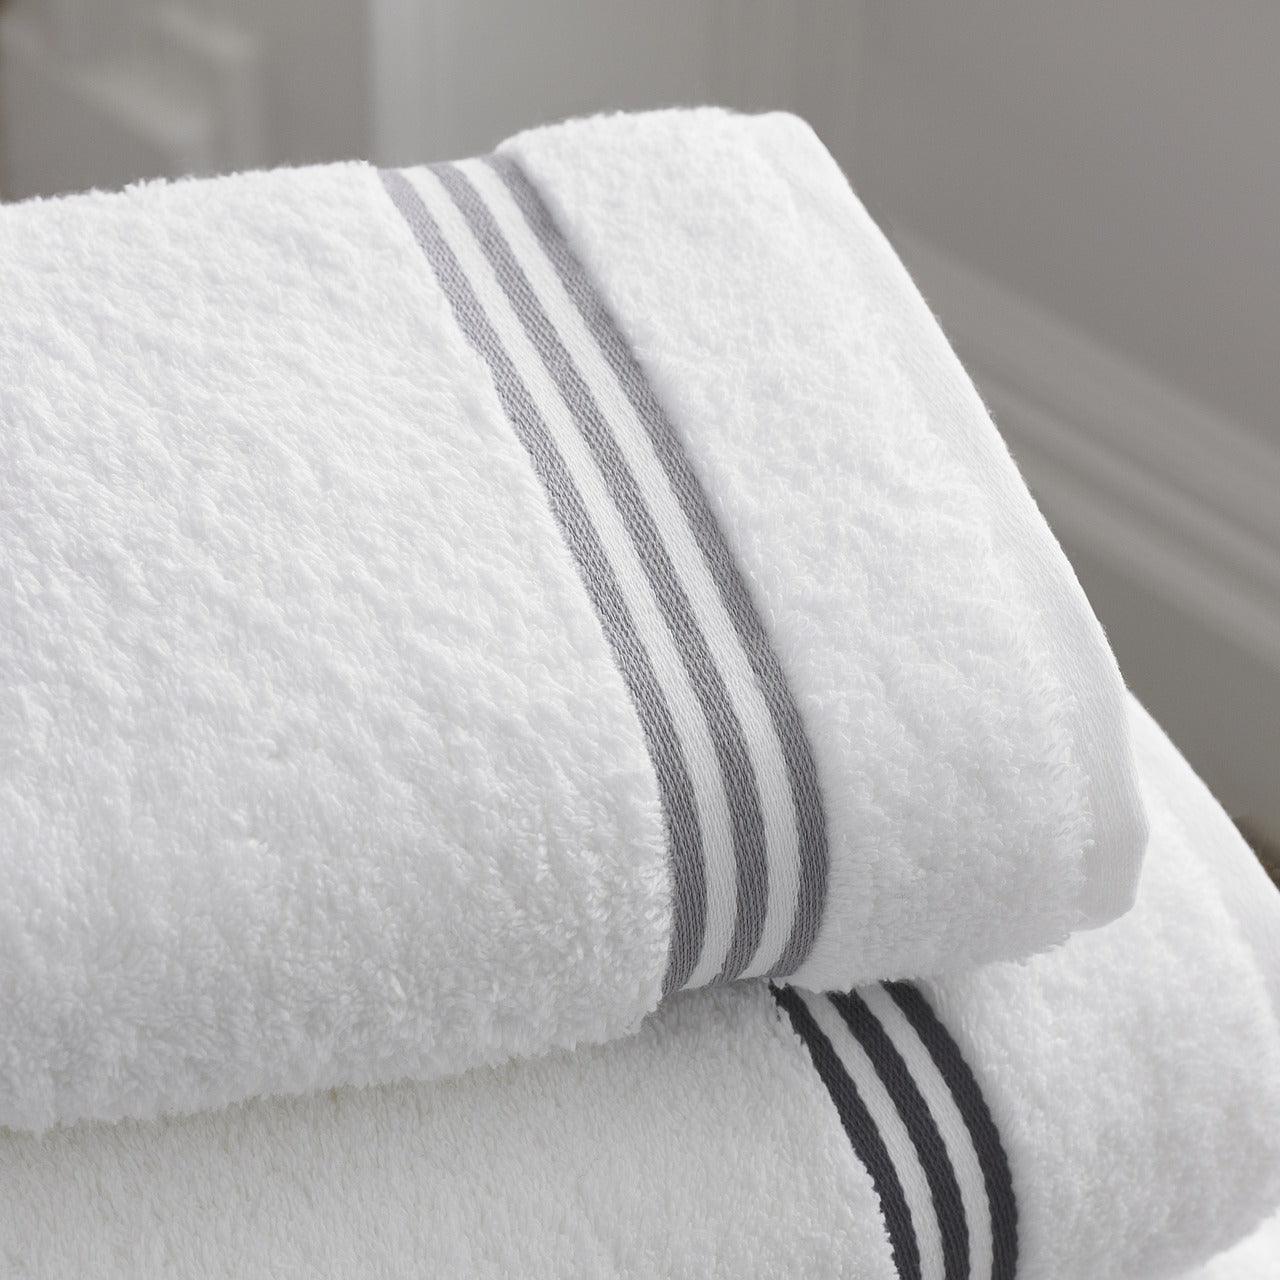 How to Choose the Right towel for your Towel Warmer